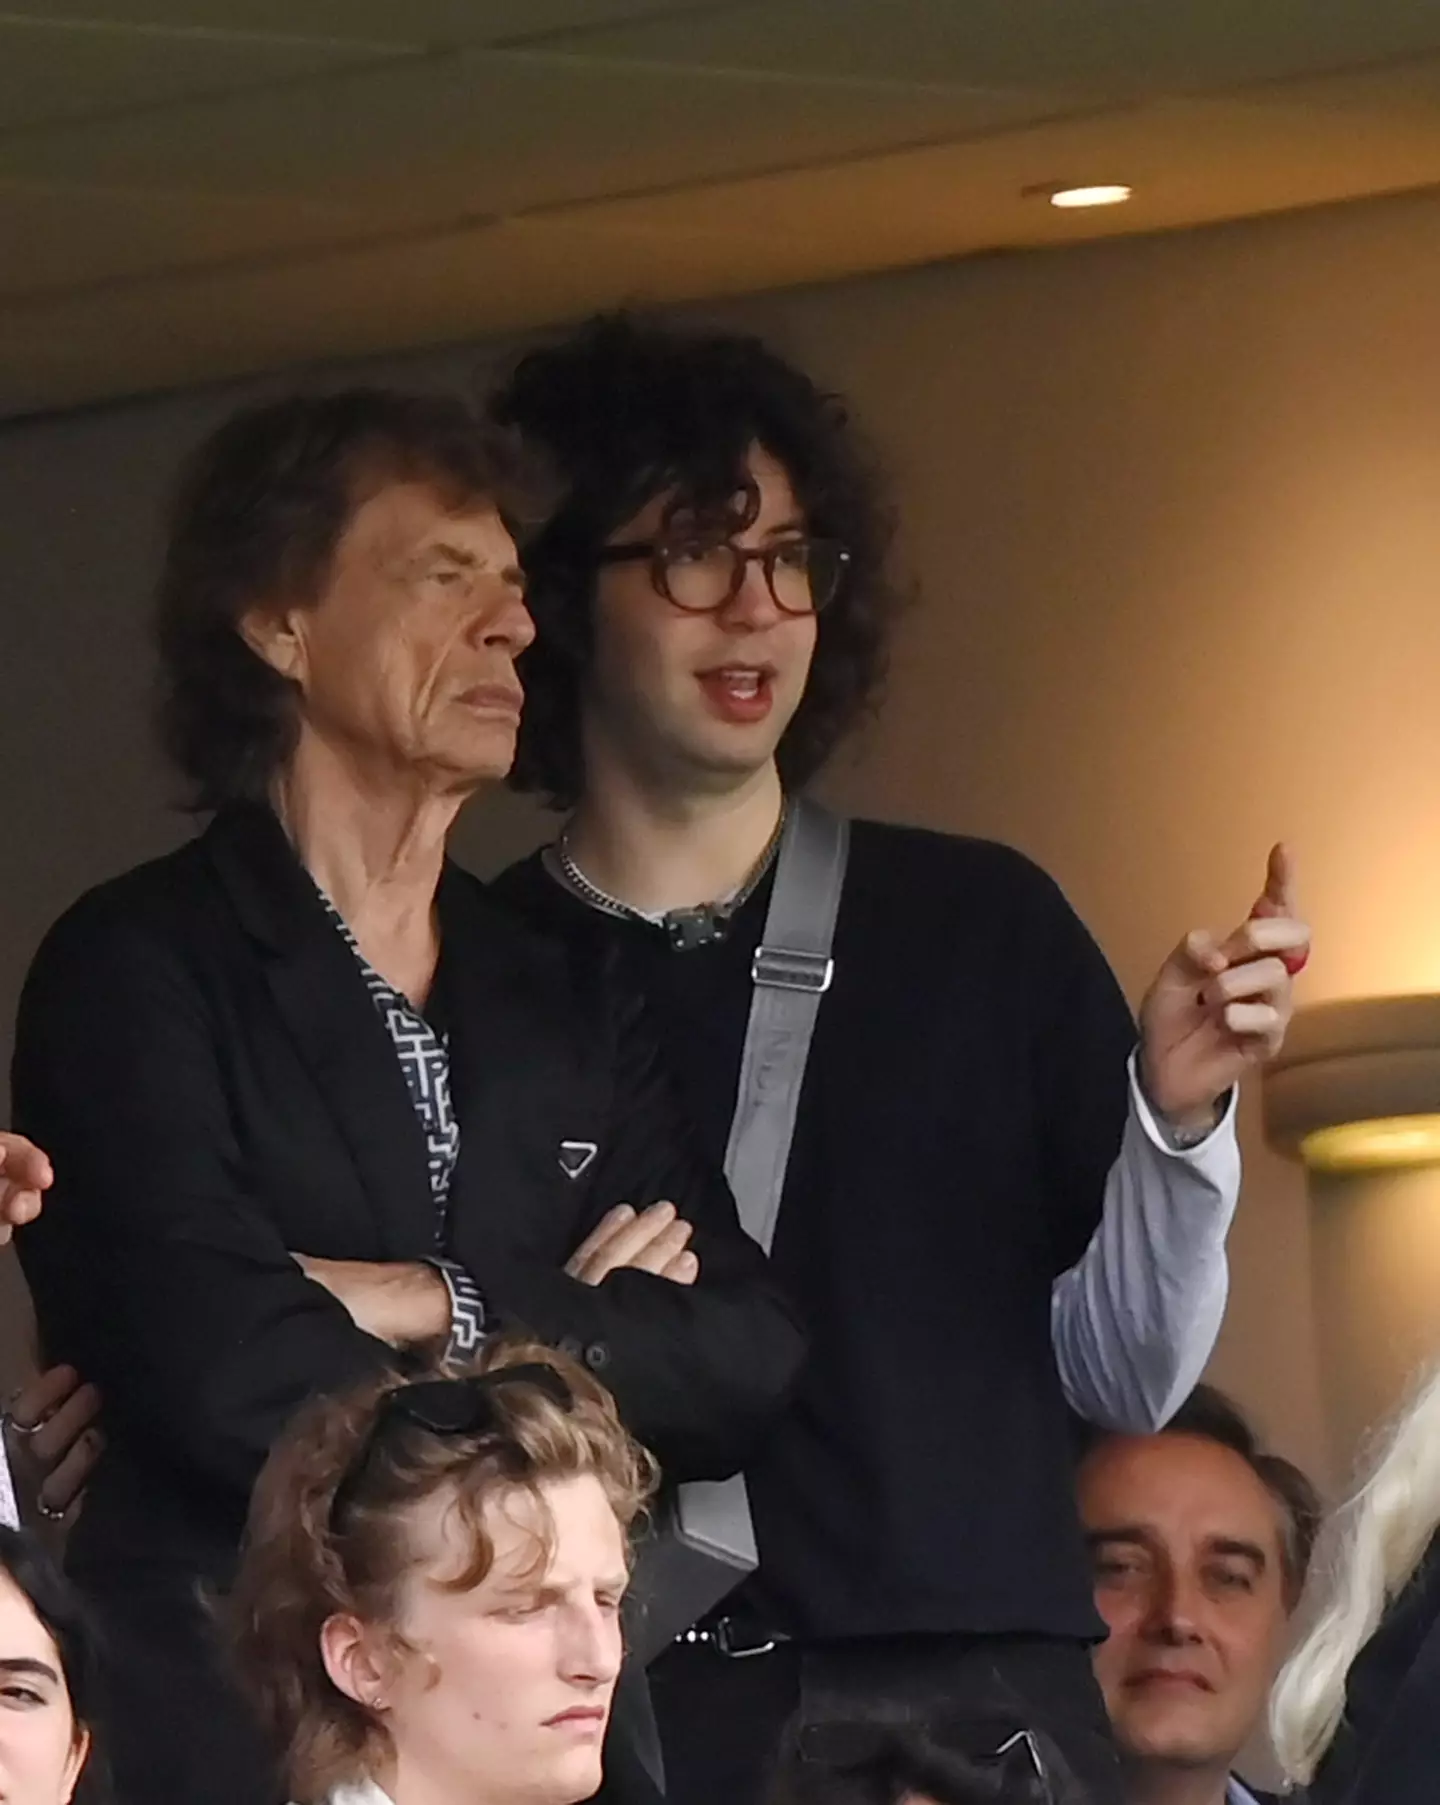 Mick Jagger and his son, Lucas.